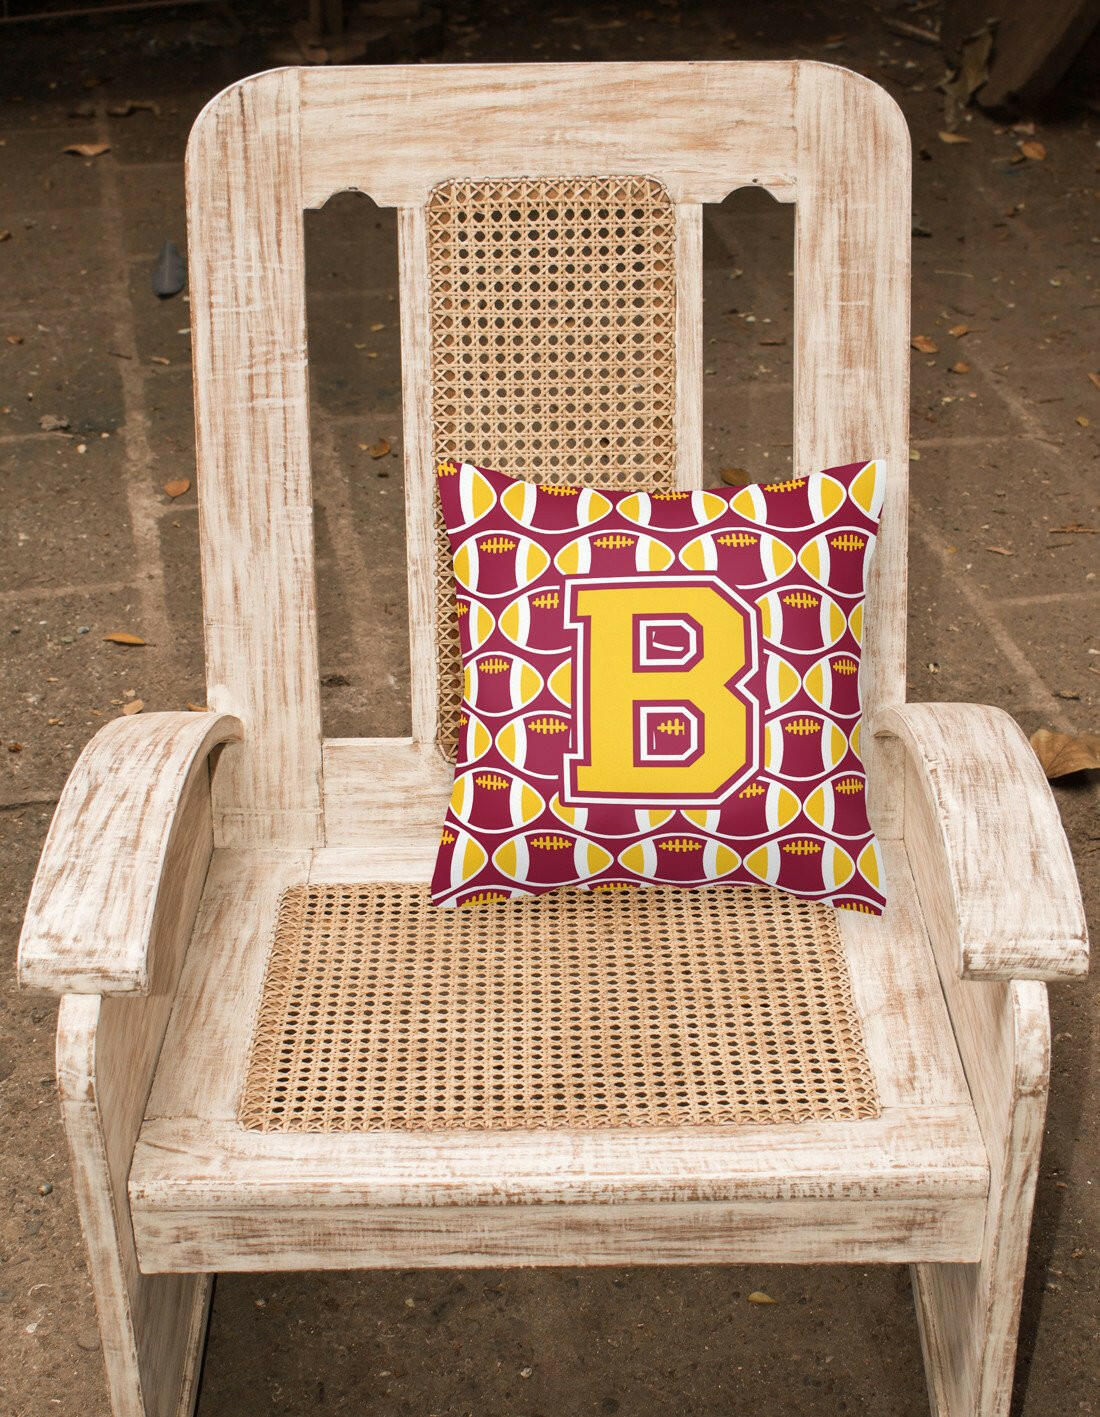 Letter B Football Maroon and Gold Fabric Decorative Pillow CJ1081-BPW1414 by Caroline's Treasures